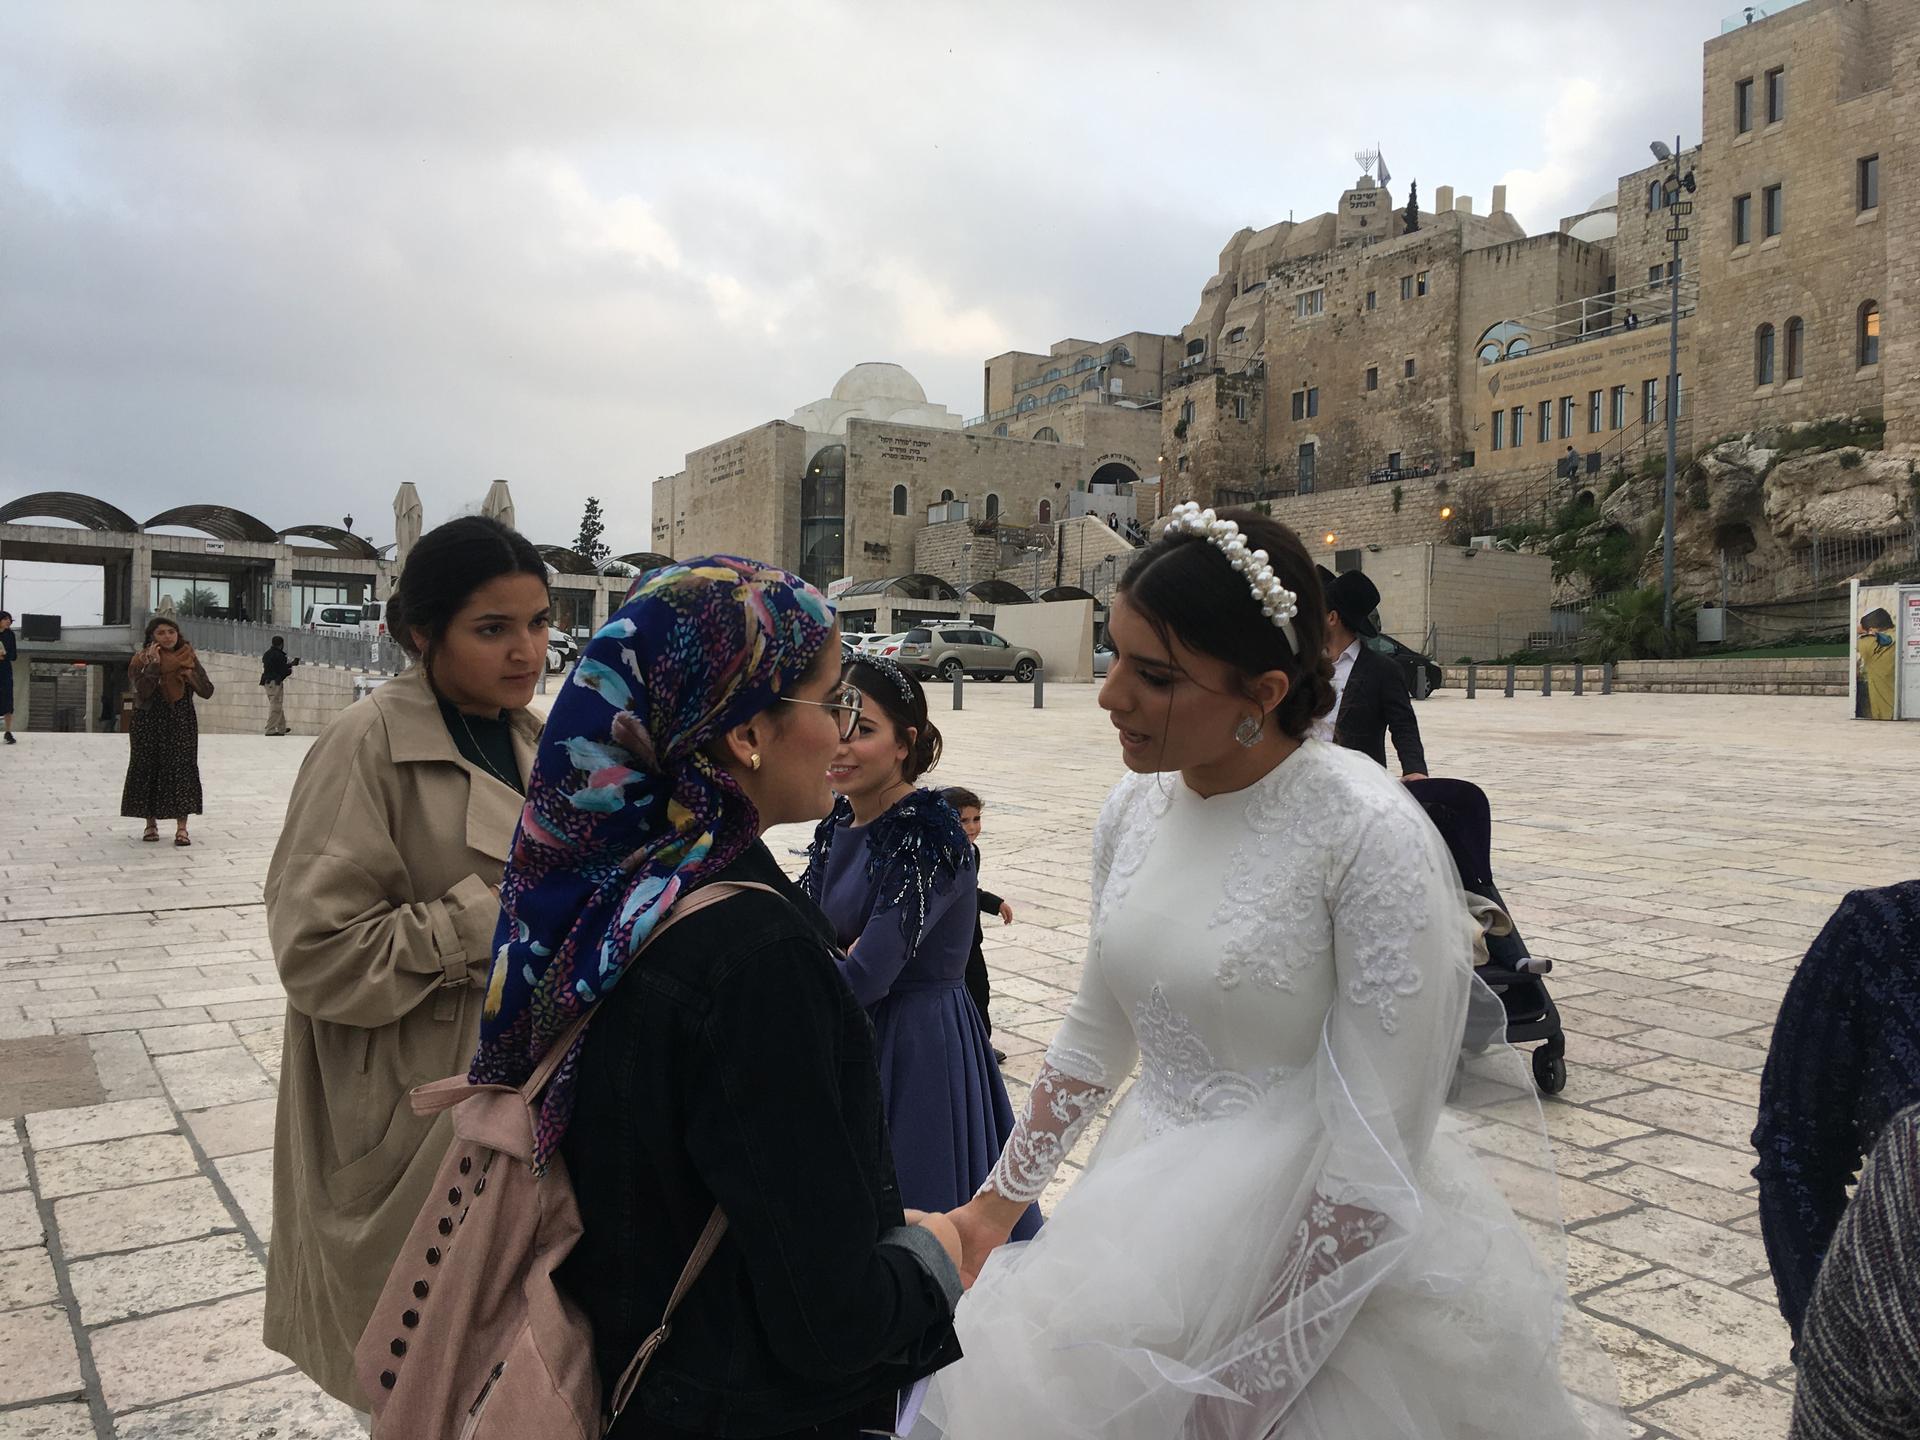 Idit Tedgi gets close to other worshippers to offer blessings on her wedding day.